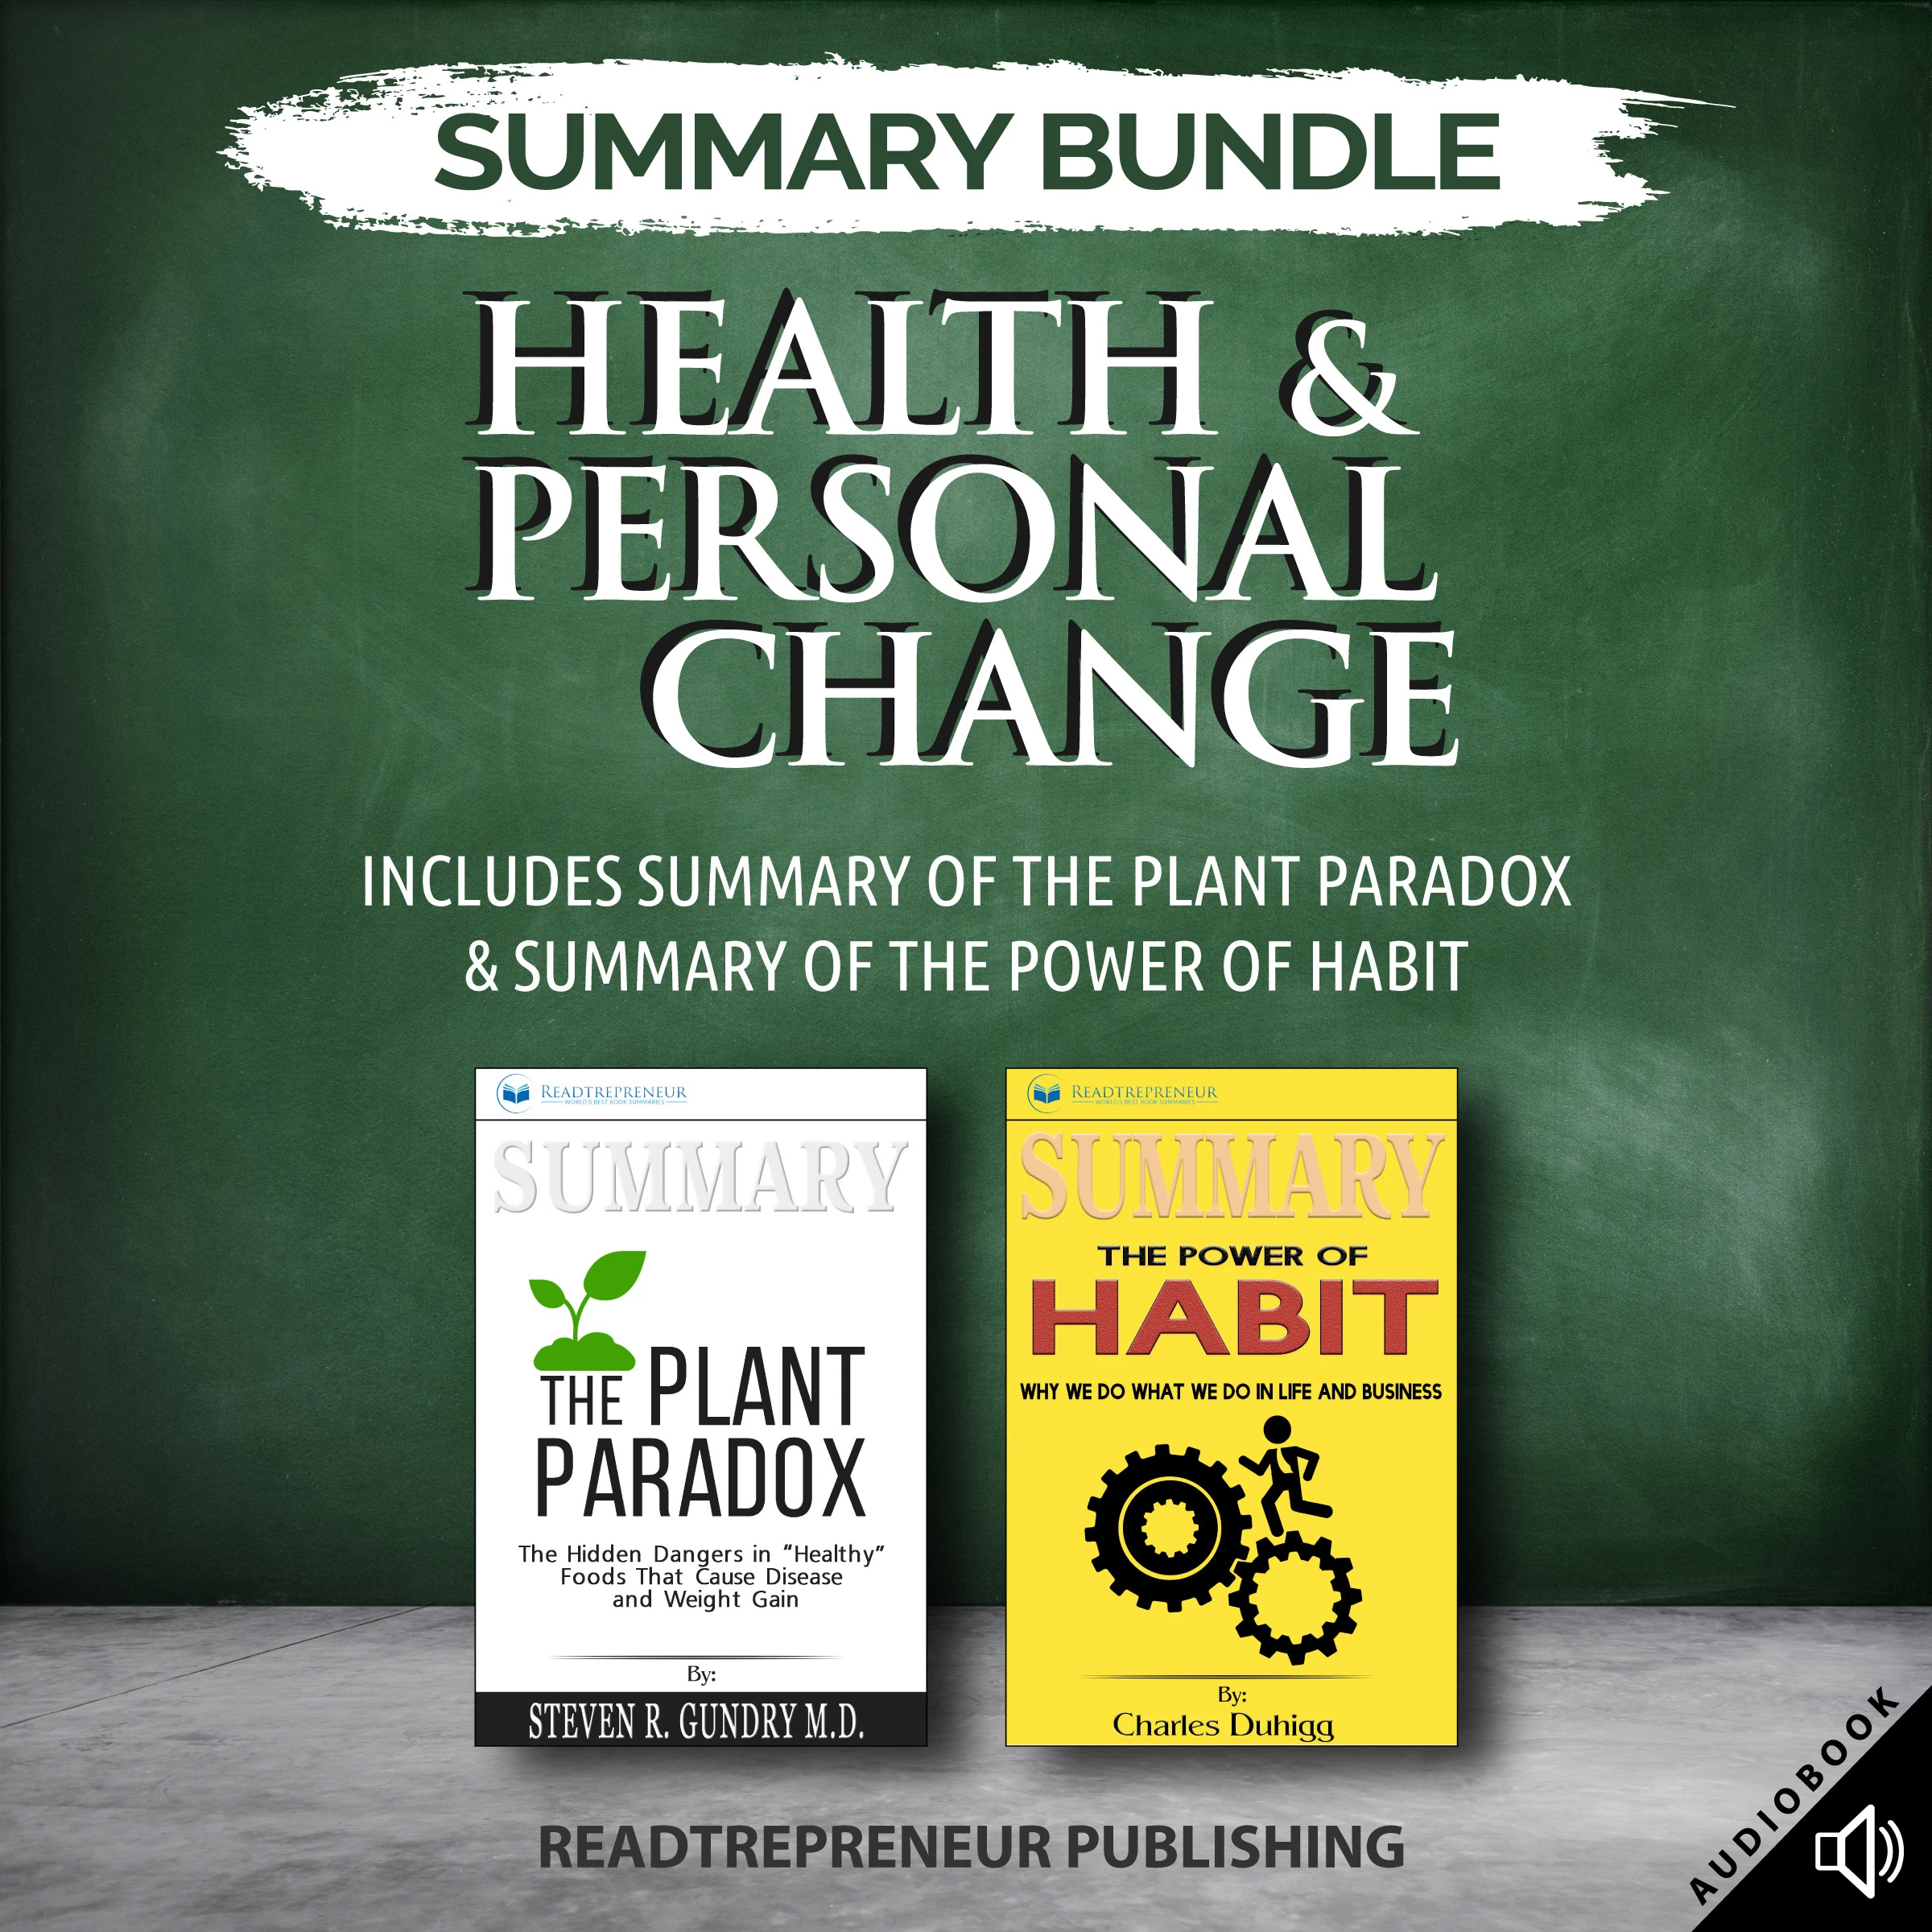 Summary Bundle: Health & Personal Change | Readtrepreneur Publishing: Includes Summary of The Plant Paradox & Summary of The Power of Habit Audiobook by Readtrepreneur Publishing